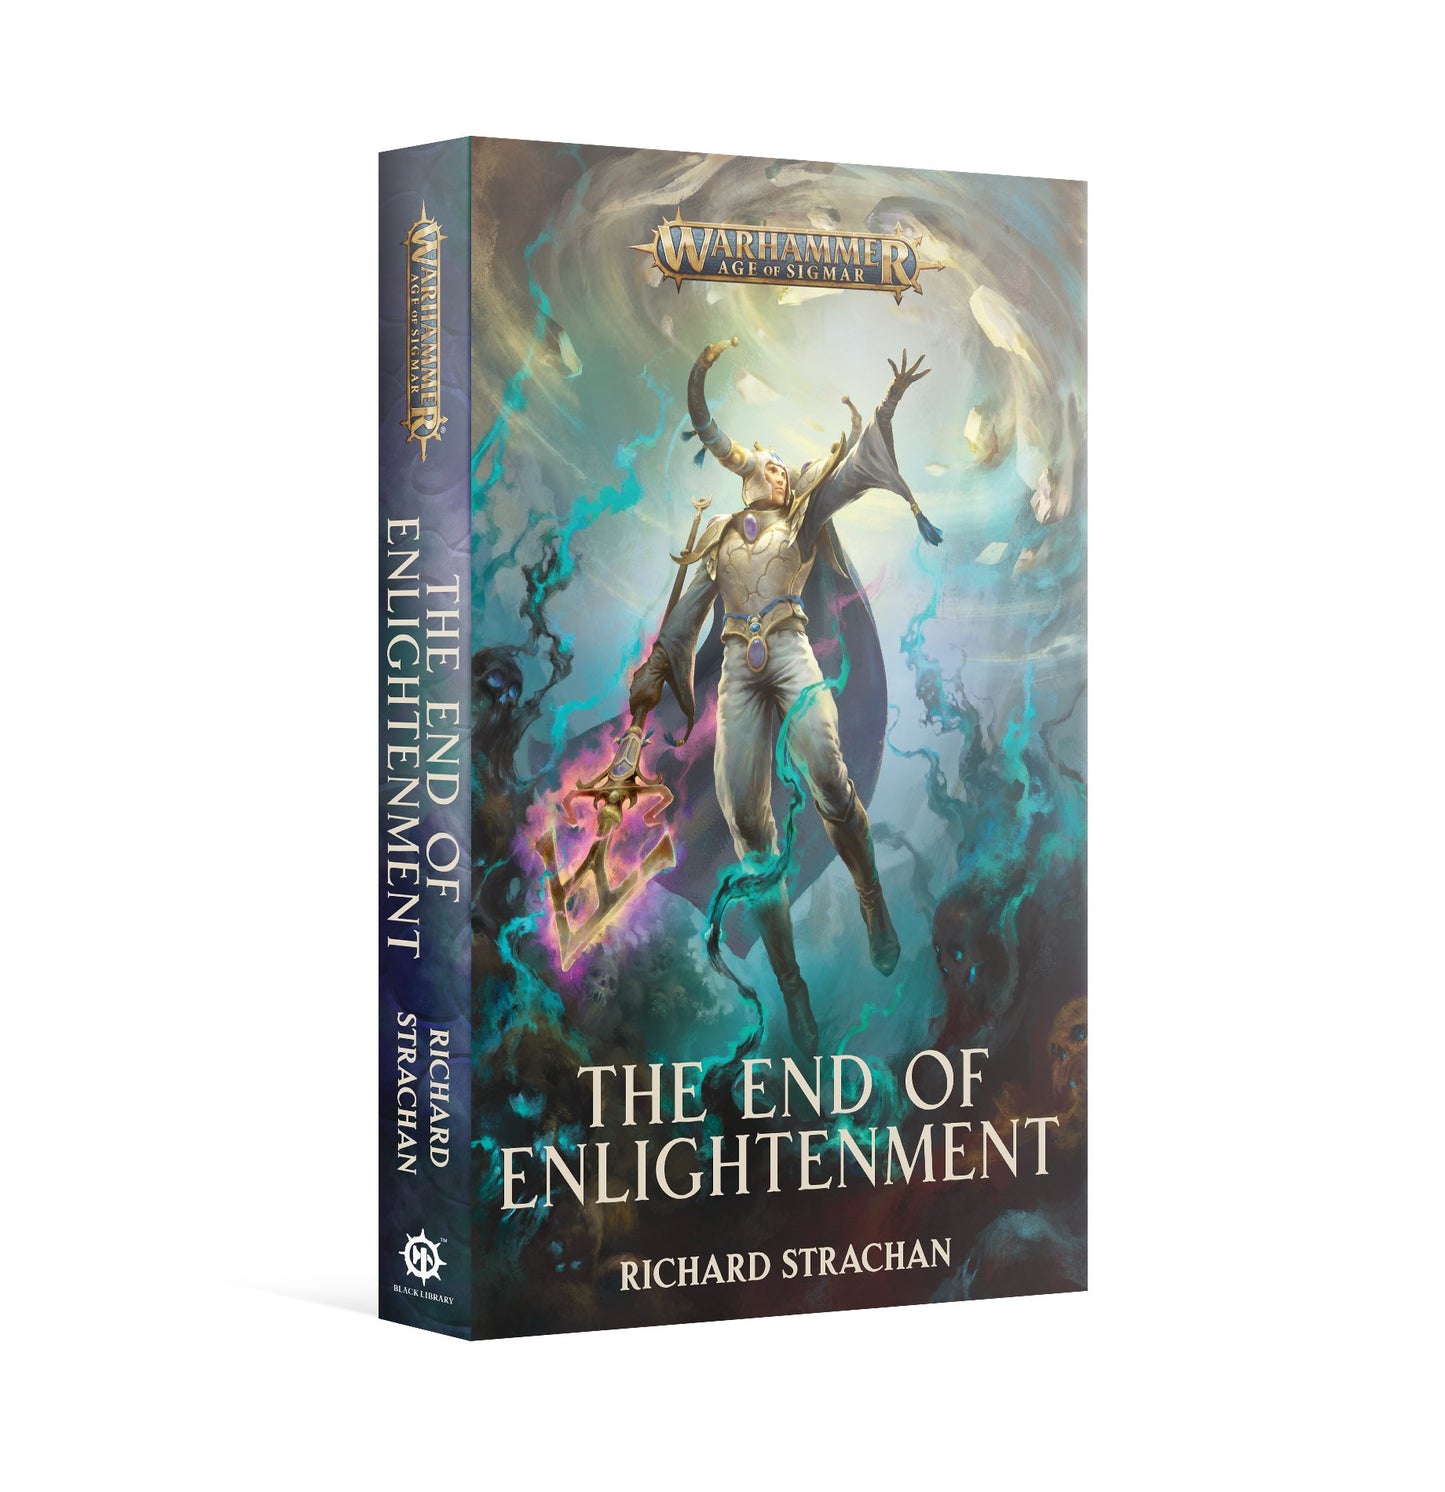 AGE OF SIGMAR THE END OF ENLIGHTENMENT BY RICHARD STRACHAN